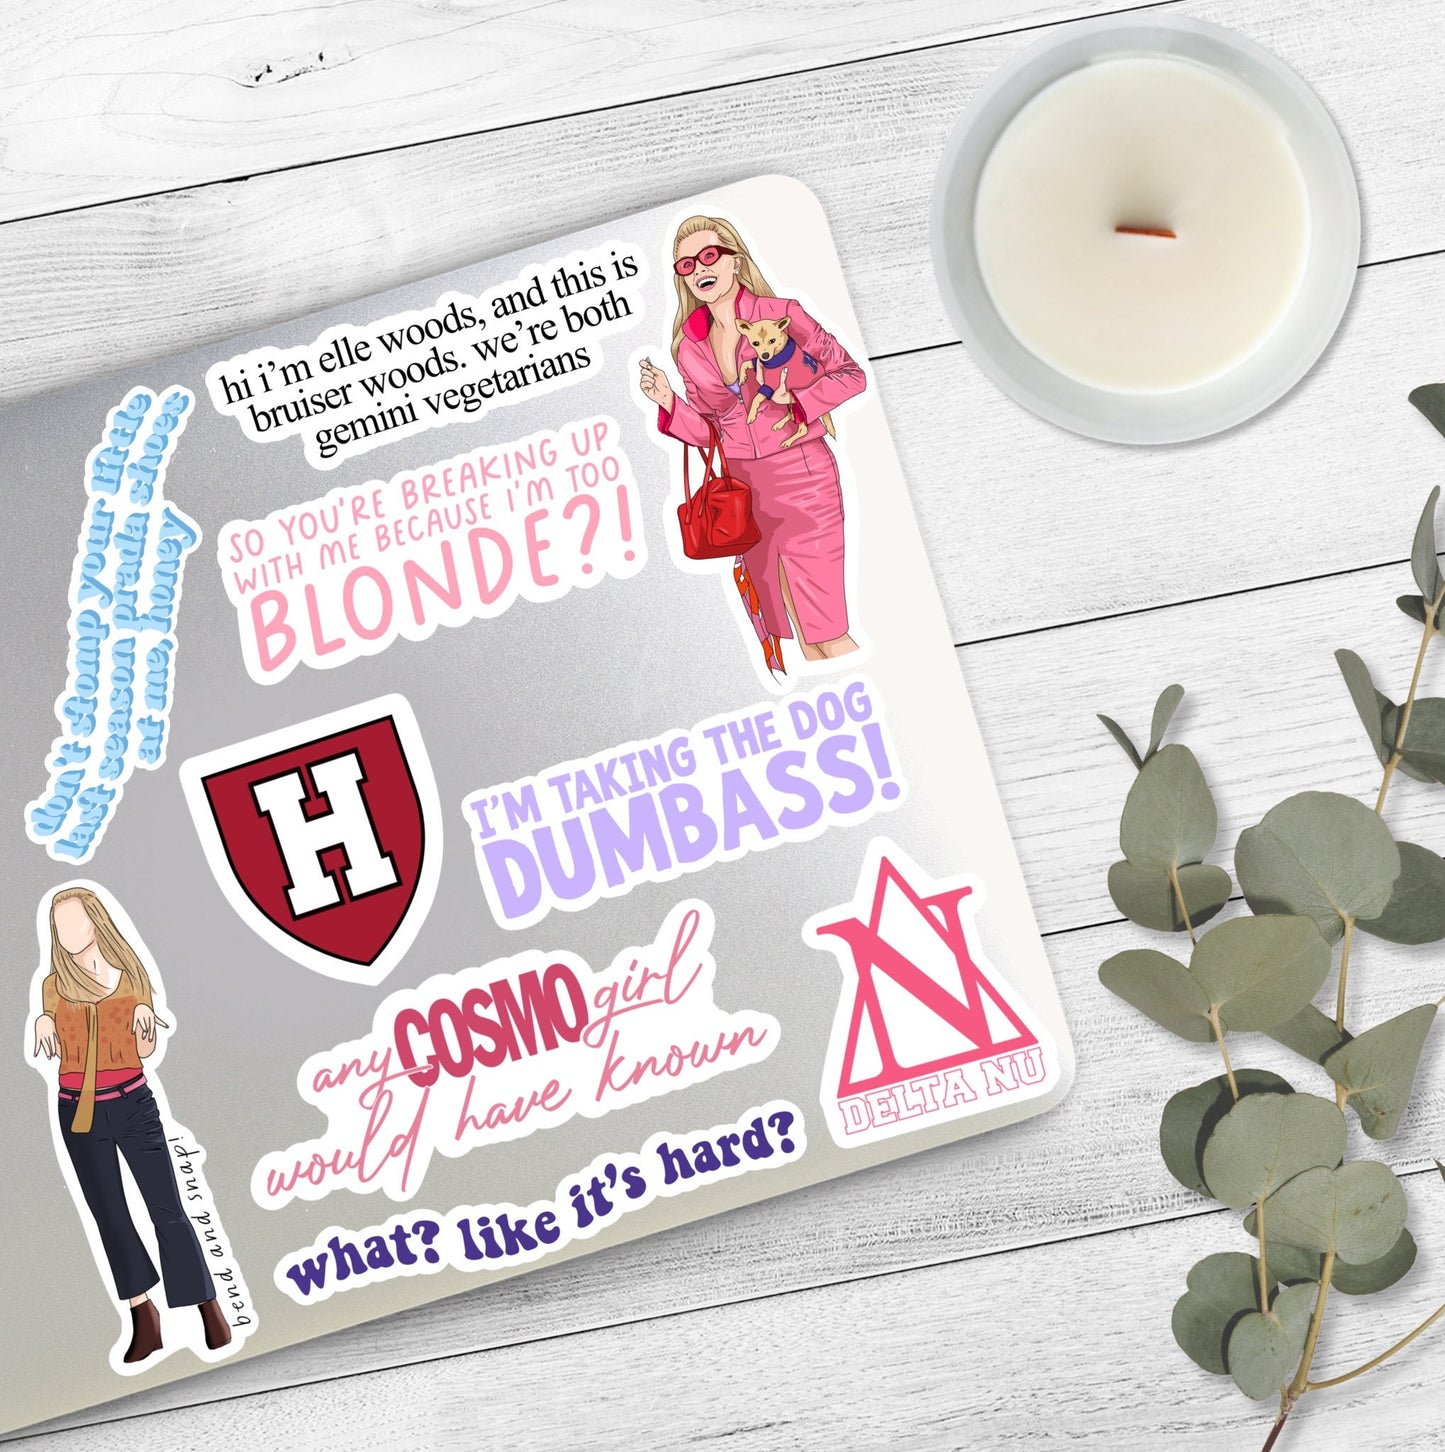 I'm Taking the Dog Dumbass Sticker | Paulette | Legally Blonde Stickers